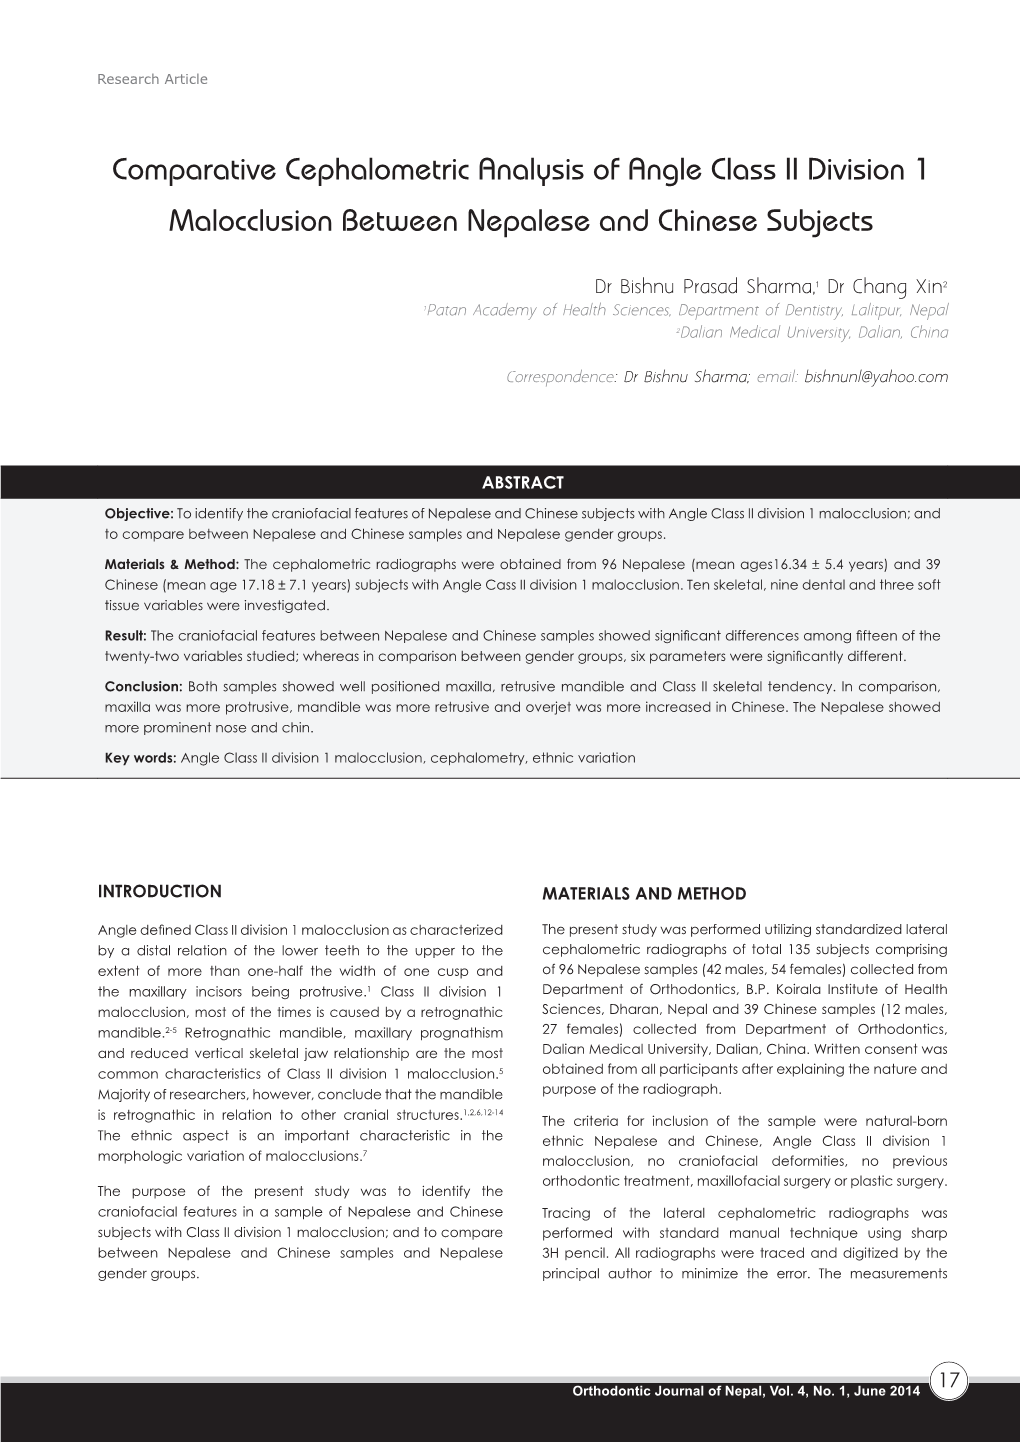 Comparative Cephalometric Analysis of Angle Class II Division 1 Malocclusion Between Nepalese and Chinese Subjects